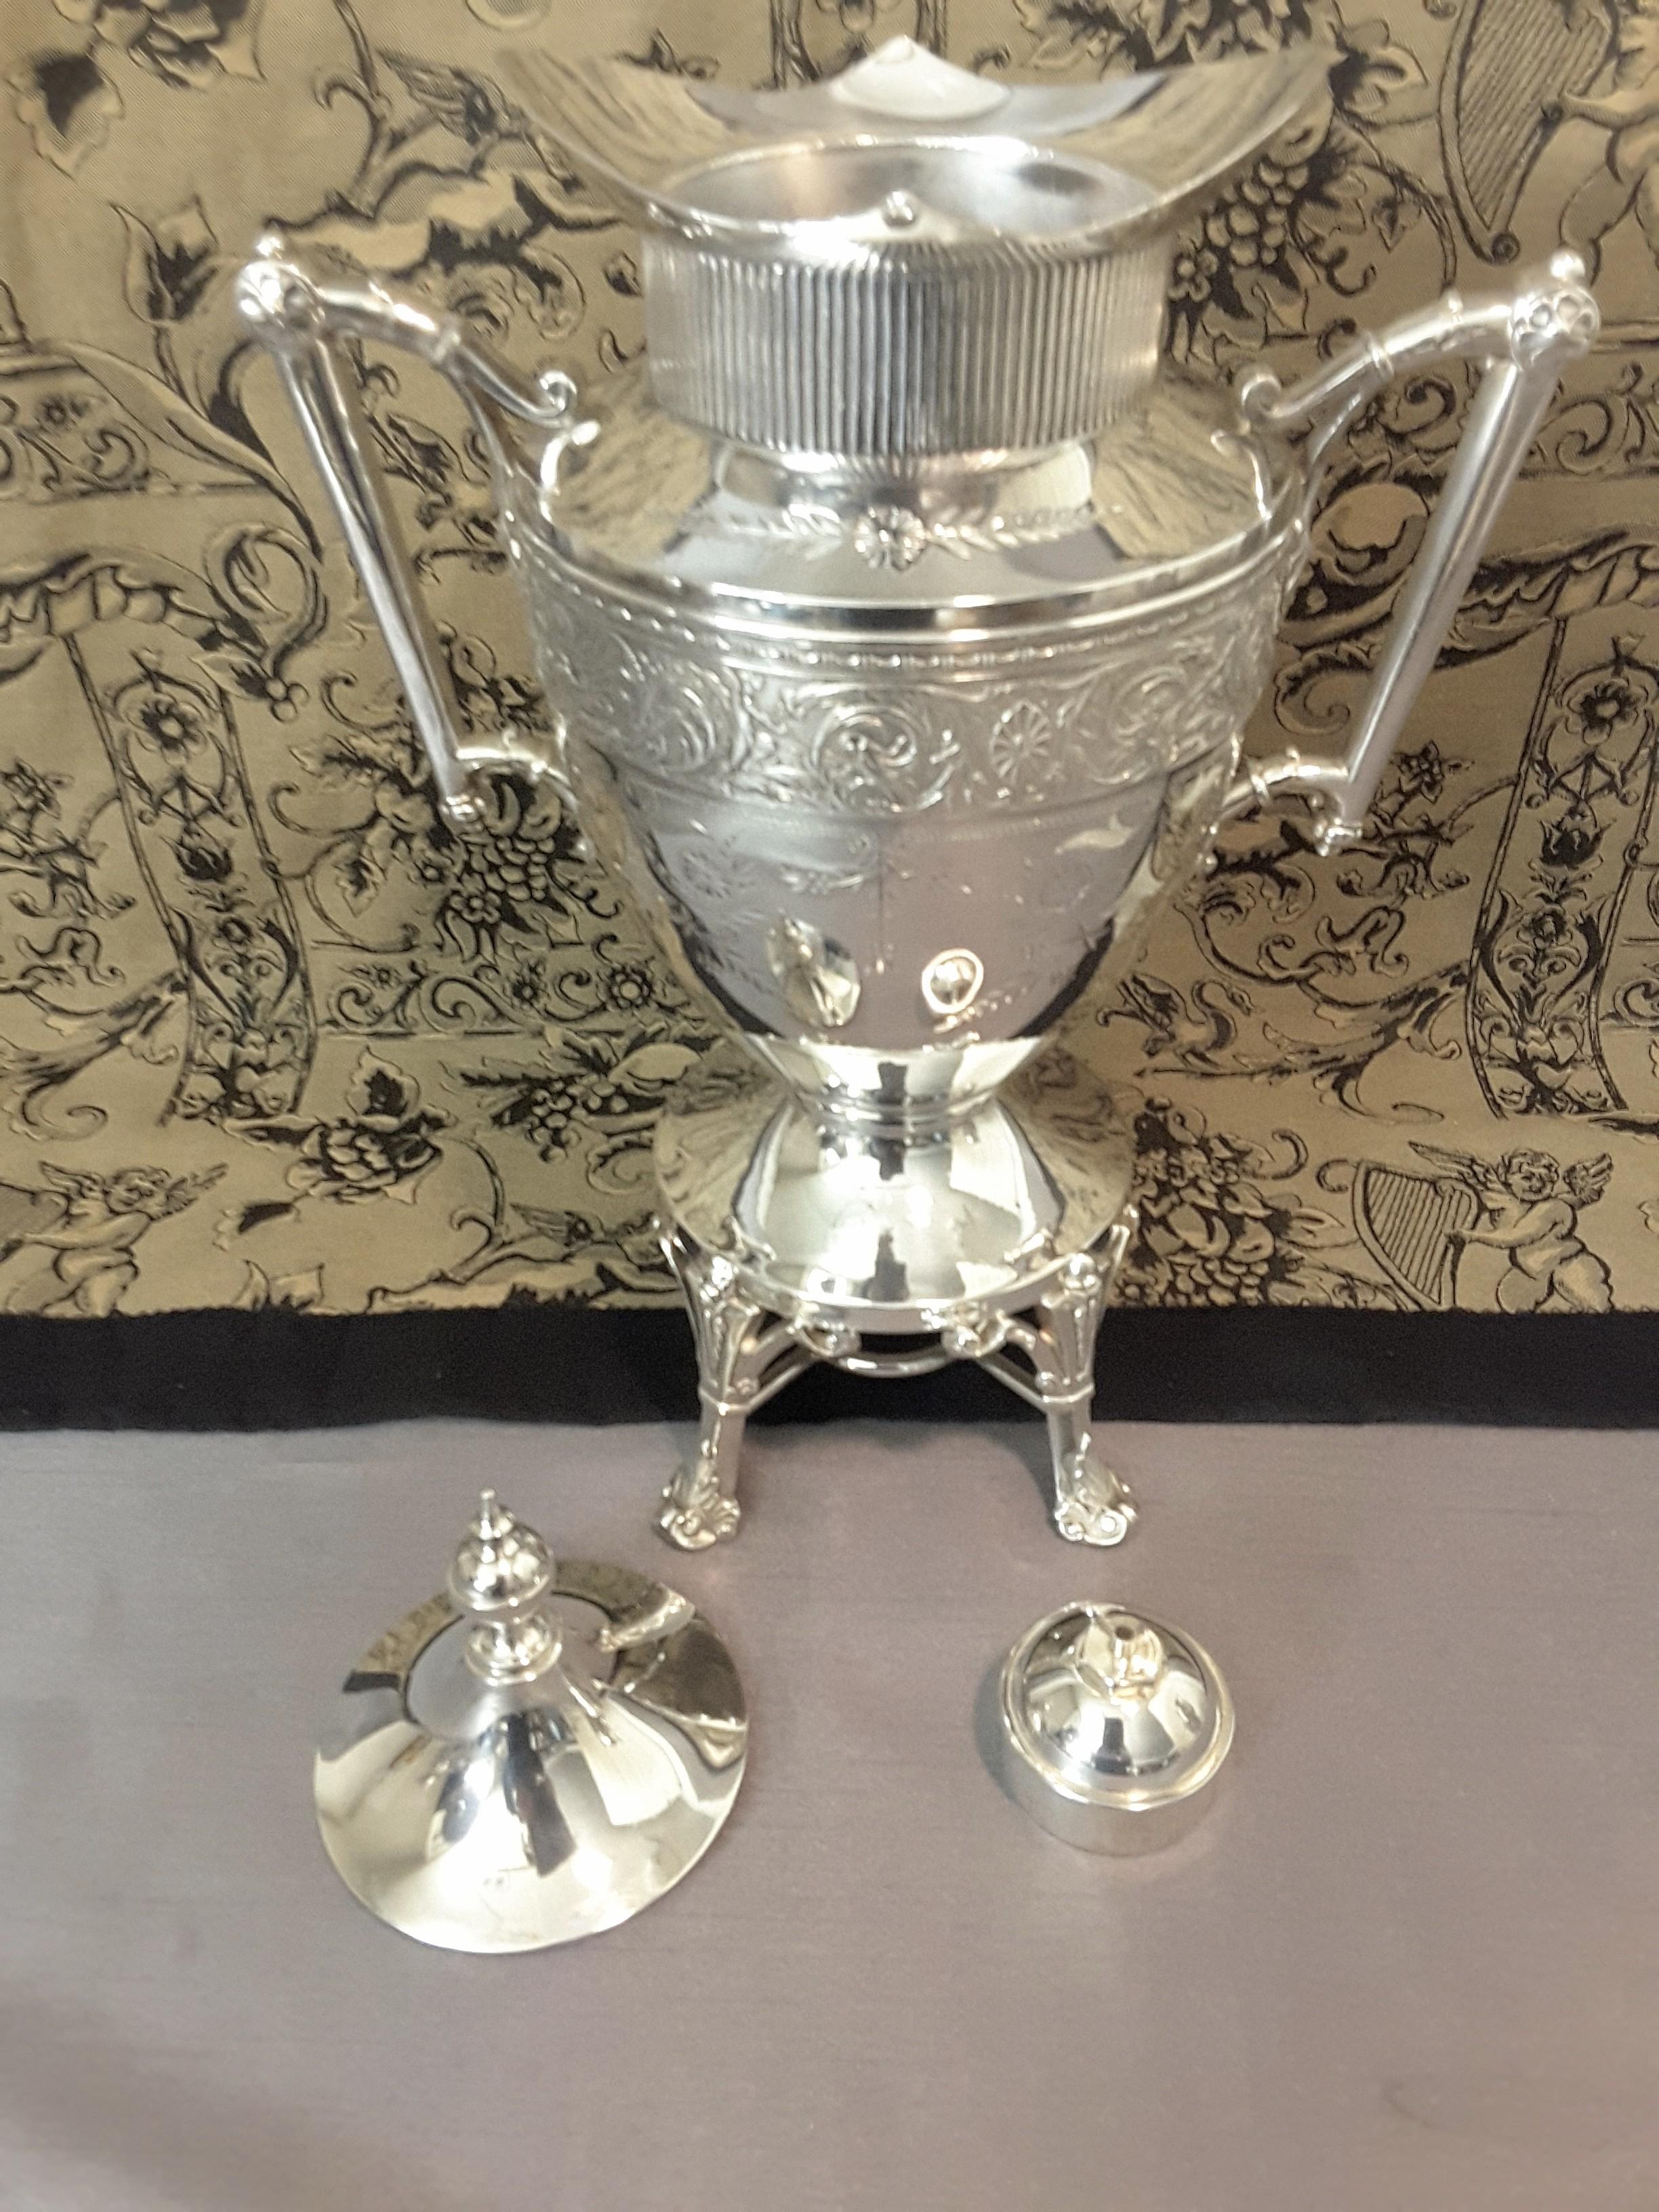 19th Century Exquisite Aesthetic Movement Silverplated Tea Service by Simpson, Hall & Miller For Sale